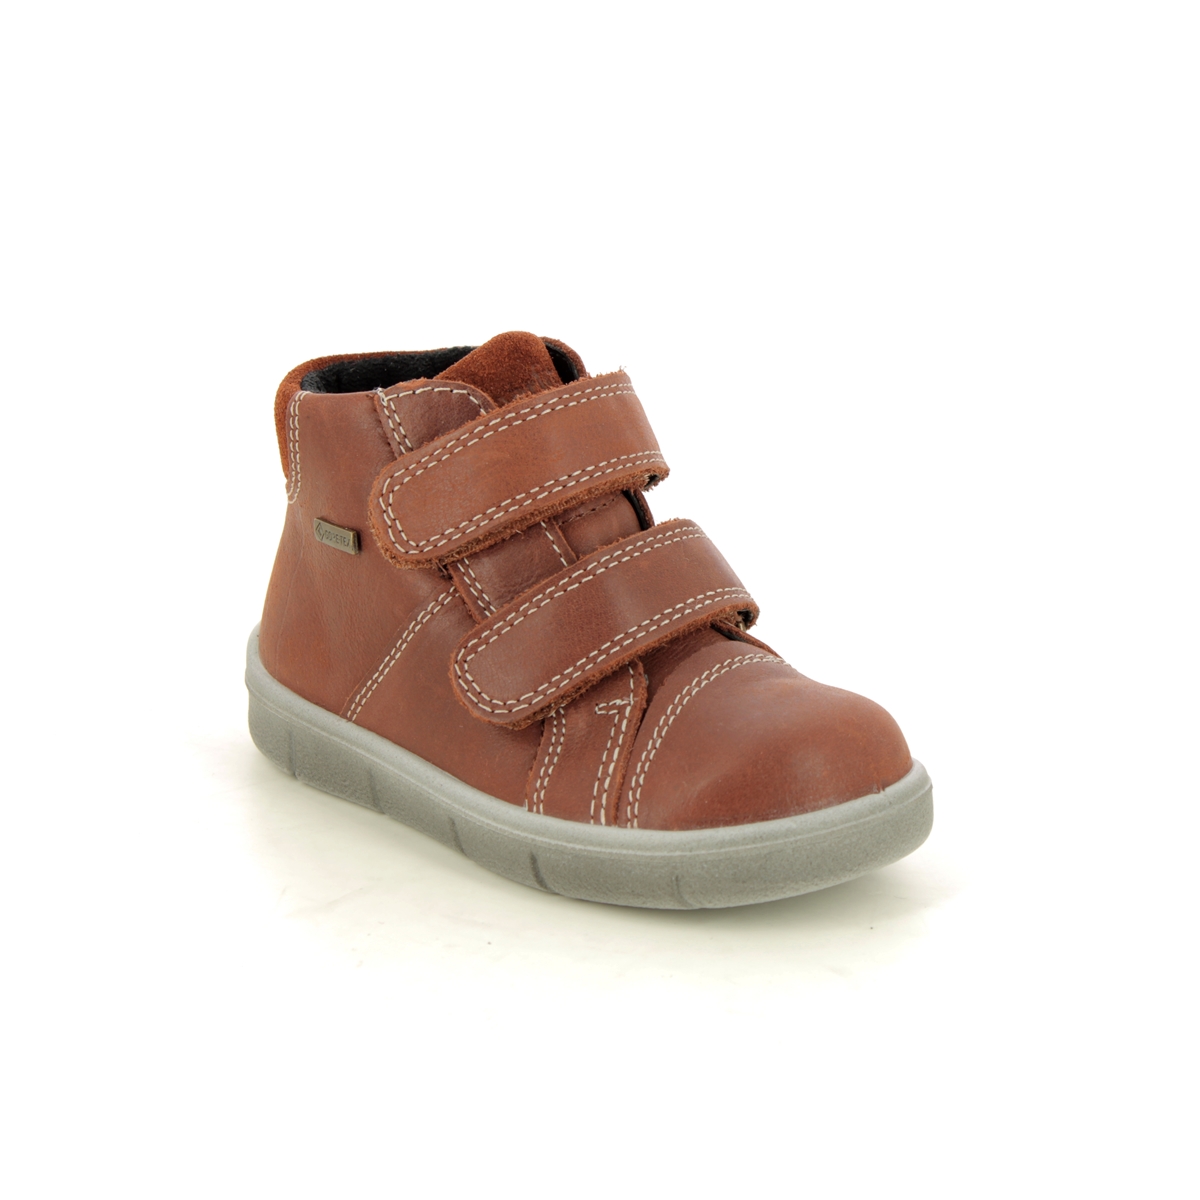 Superfit Ulli 2V Gtx Tan Leather  Kids Toddler Boys Boots 0800423-3000 In Size 22 In Plain Tan Leather